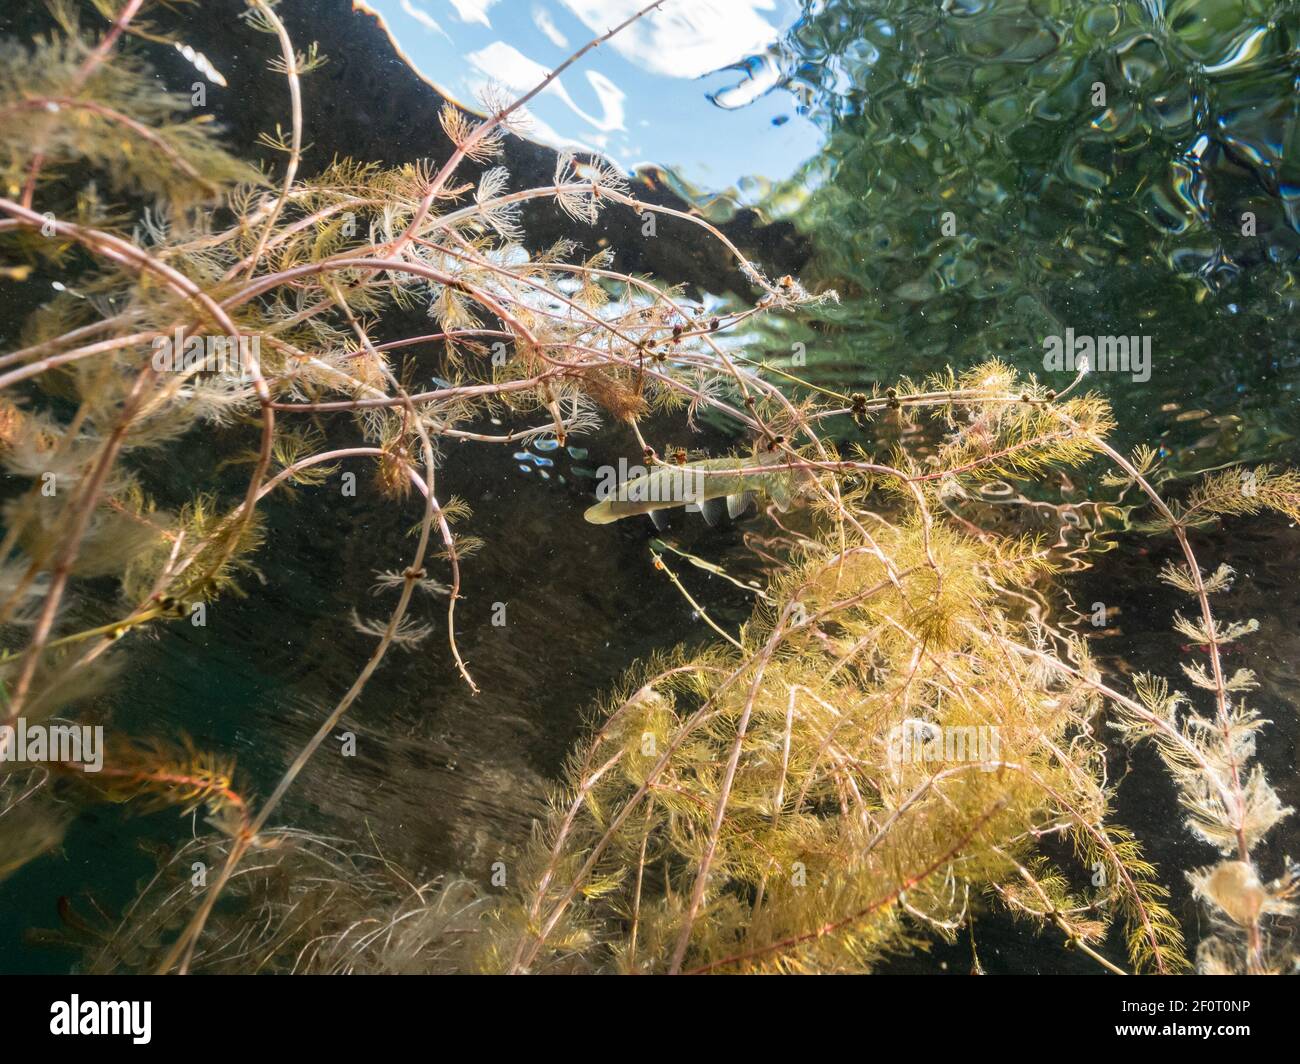 Small pike among water-milfoil plant leaves underwater in lake Stock Photo